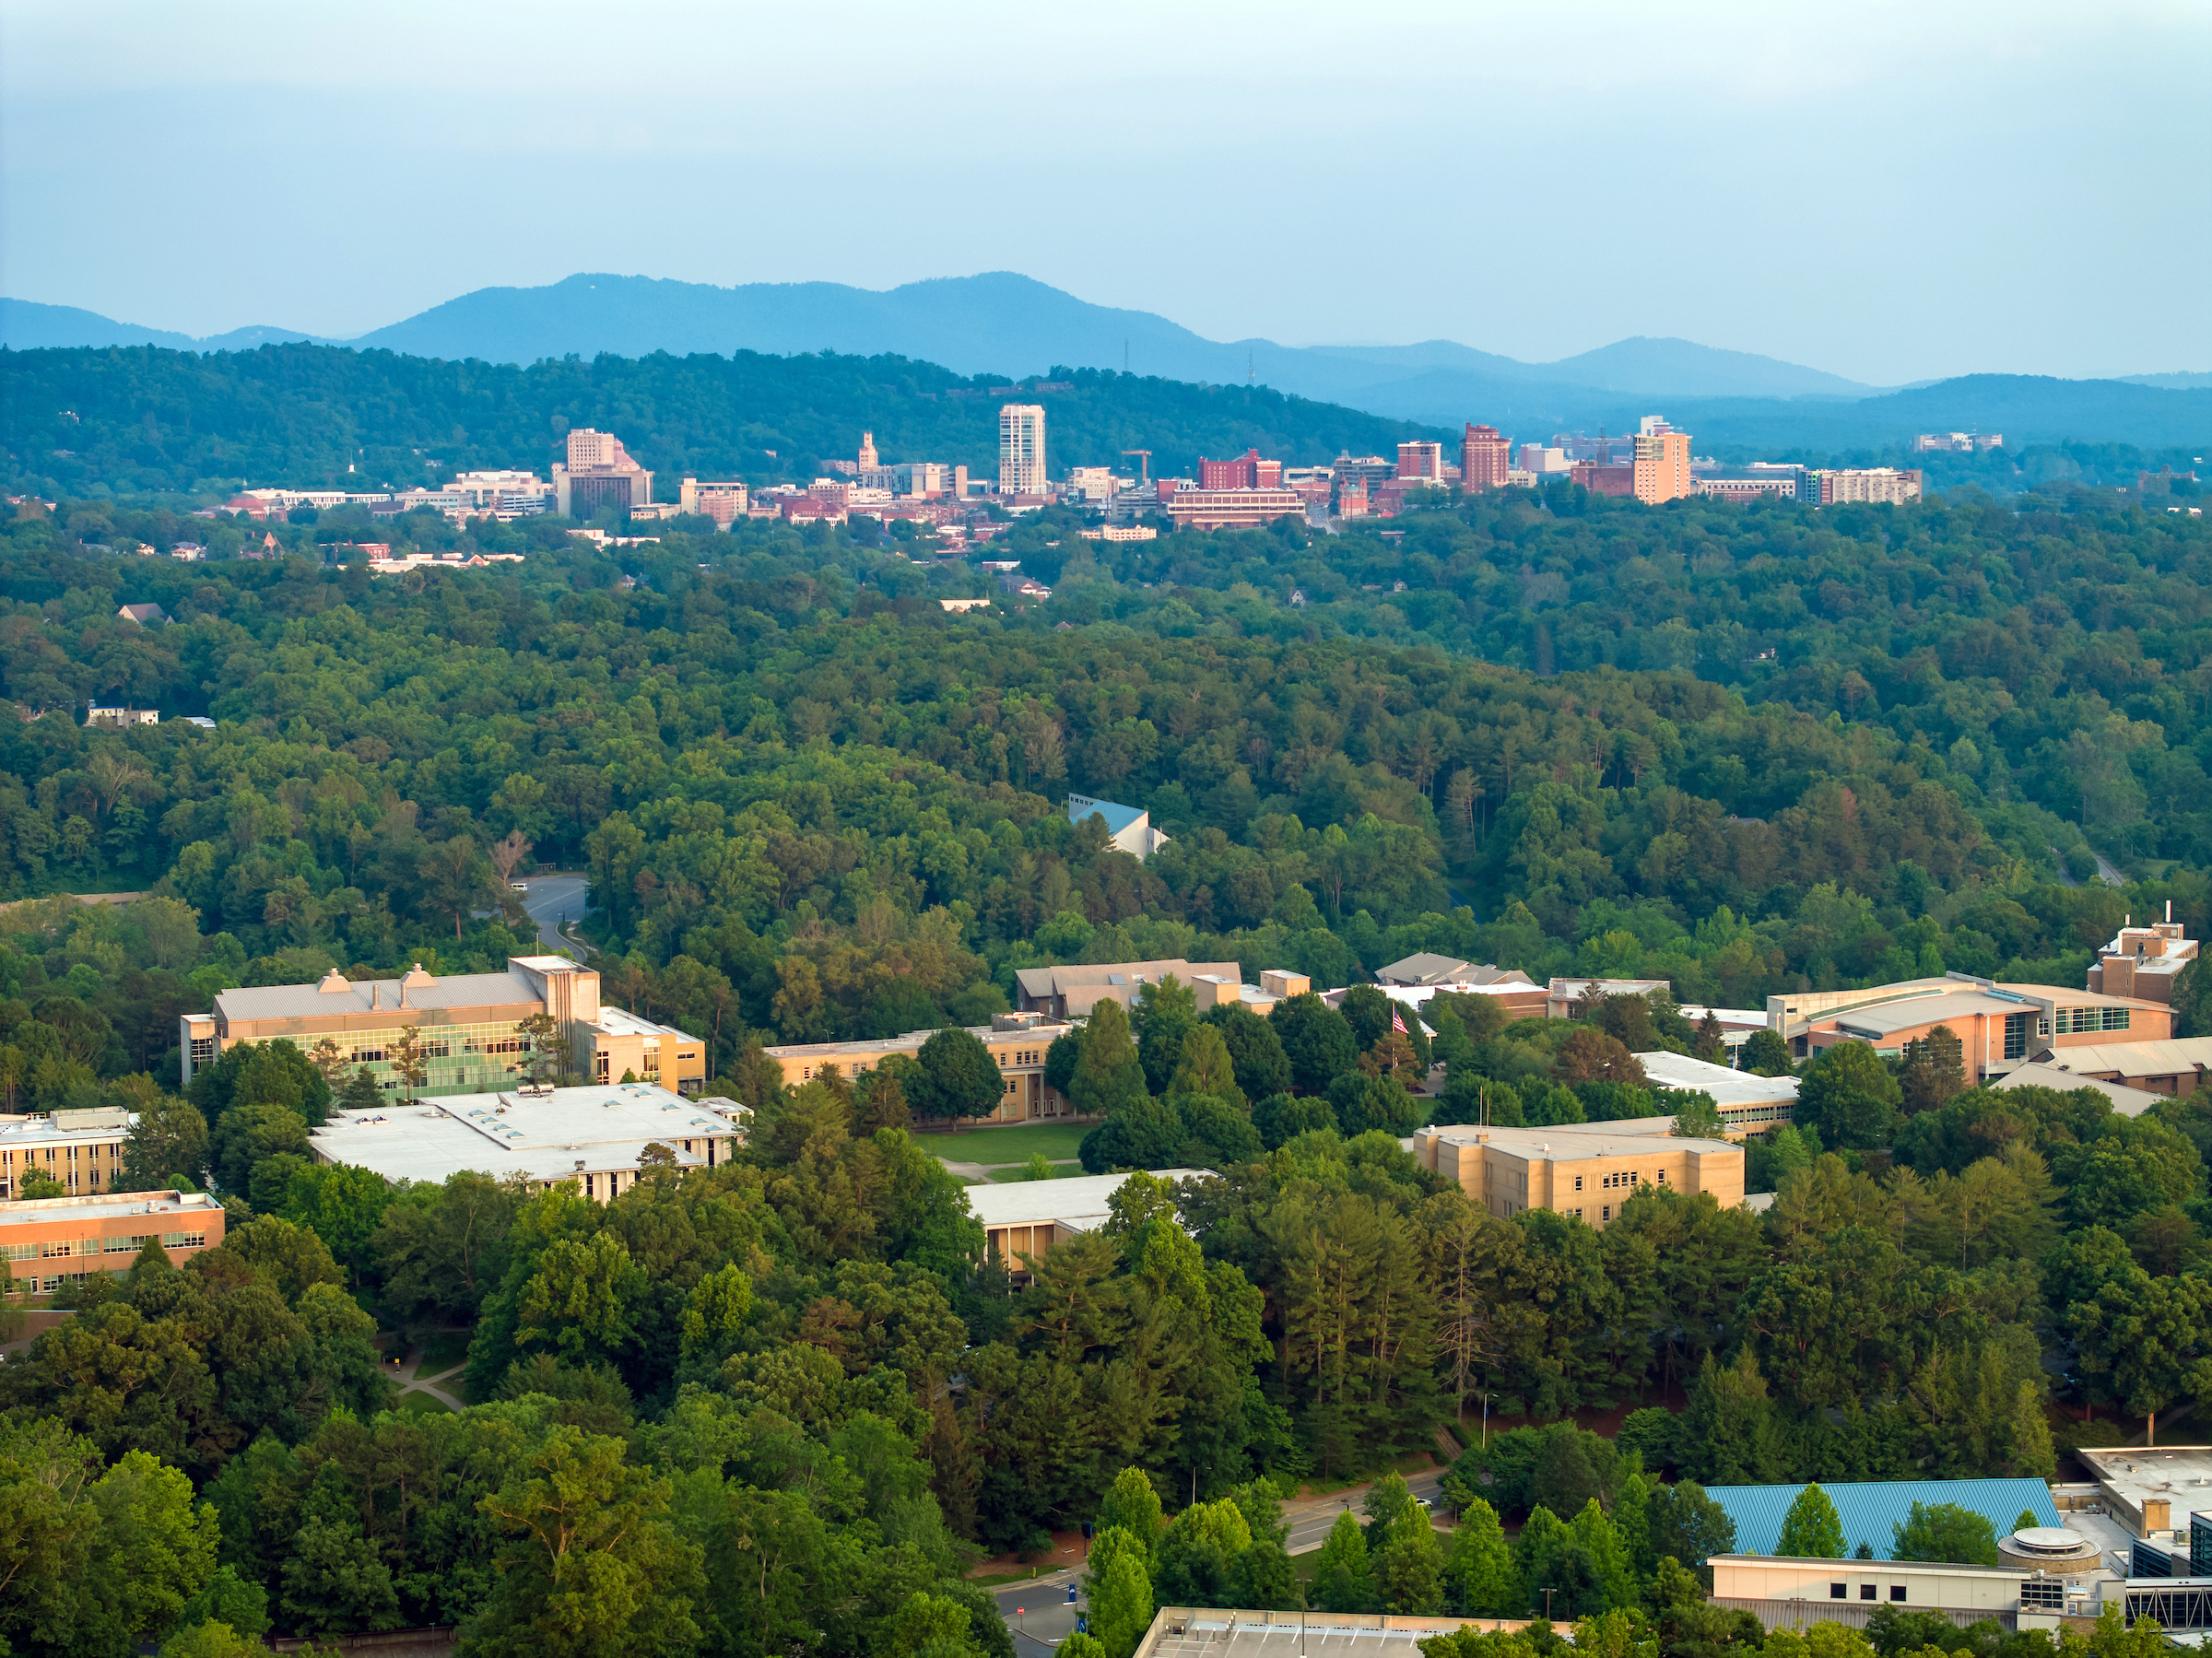 drone image of Unc asheville's campus and downtown asheville skyline